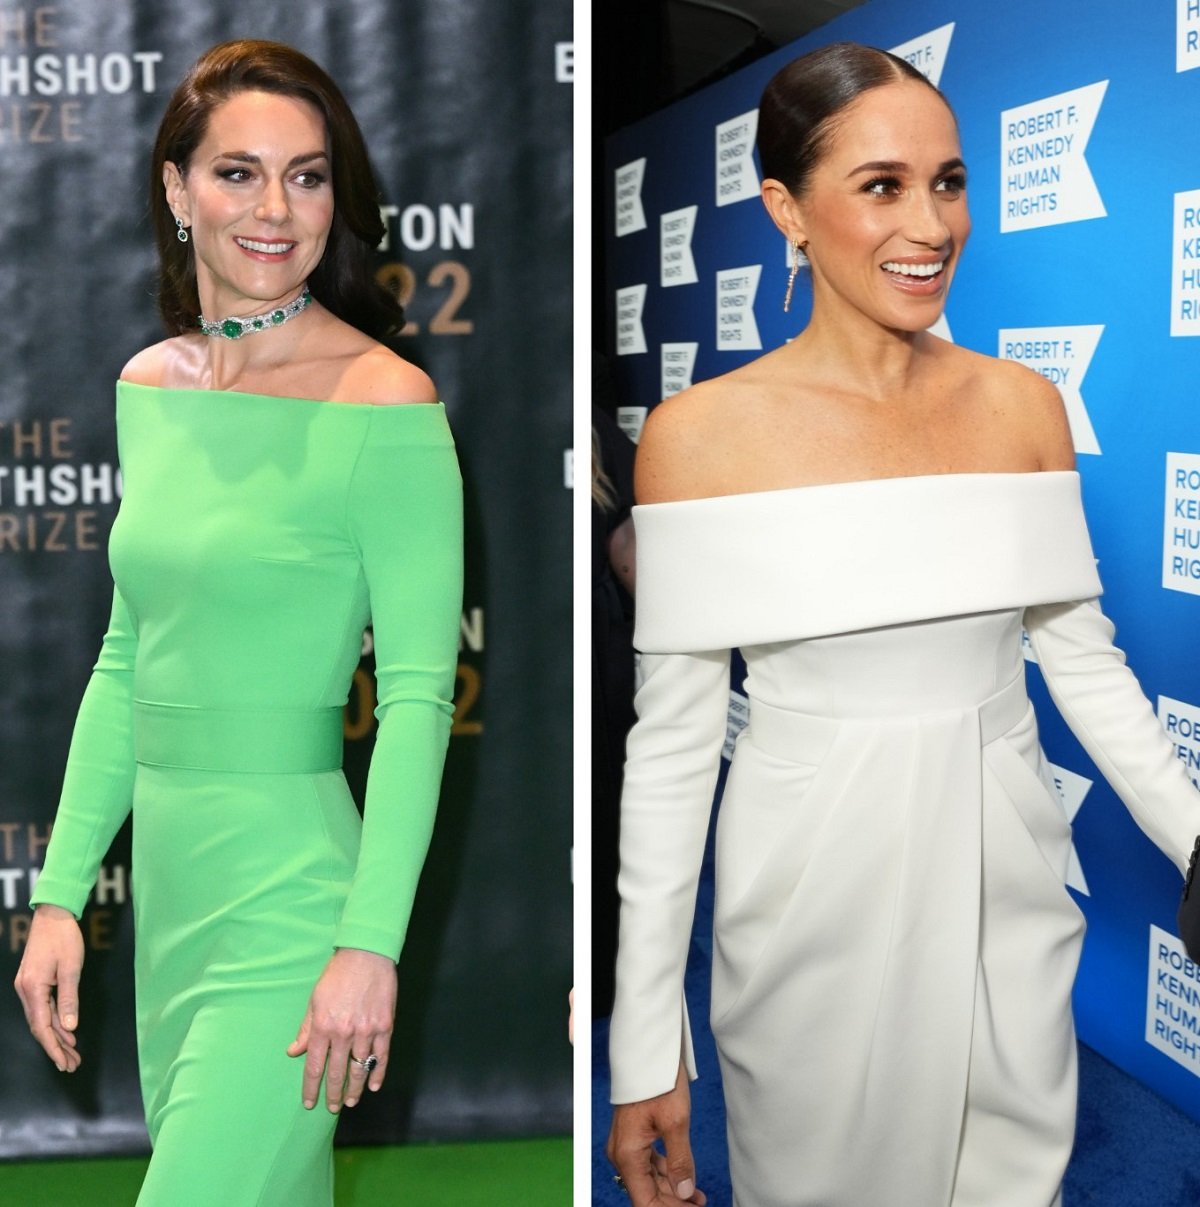 (L) Kate Middleton smiles on the carpet at The Earthshot Prize Awards 2022, (R) Meghan Markle smiles on the carpet at the 2022 Robert F. Kennedy Human Rights Ripple of Hope Gala